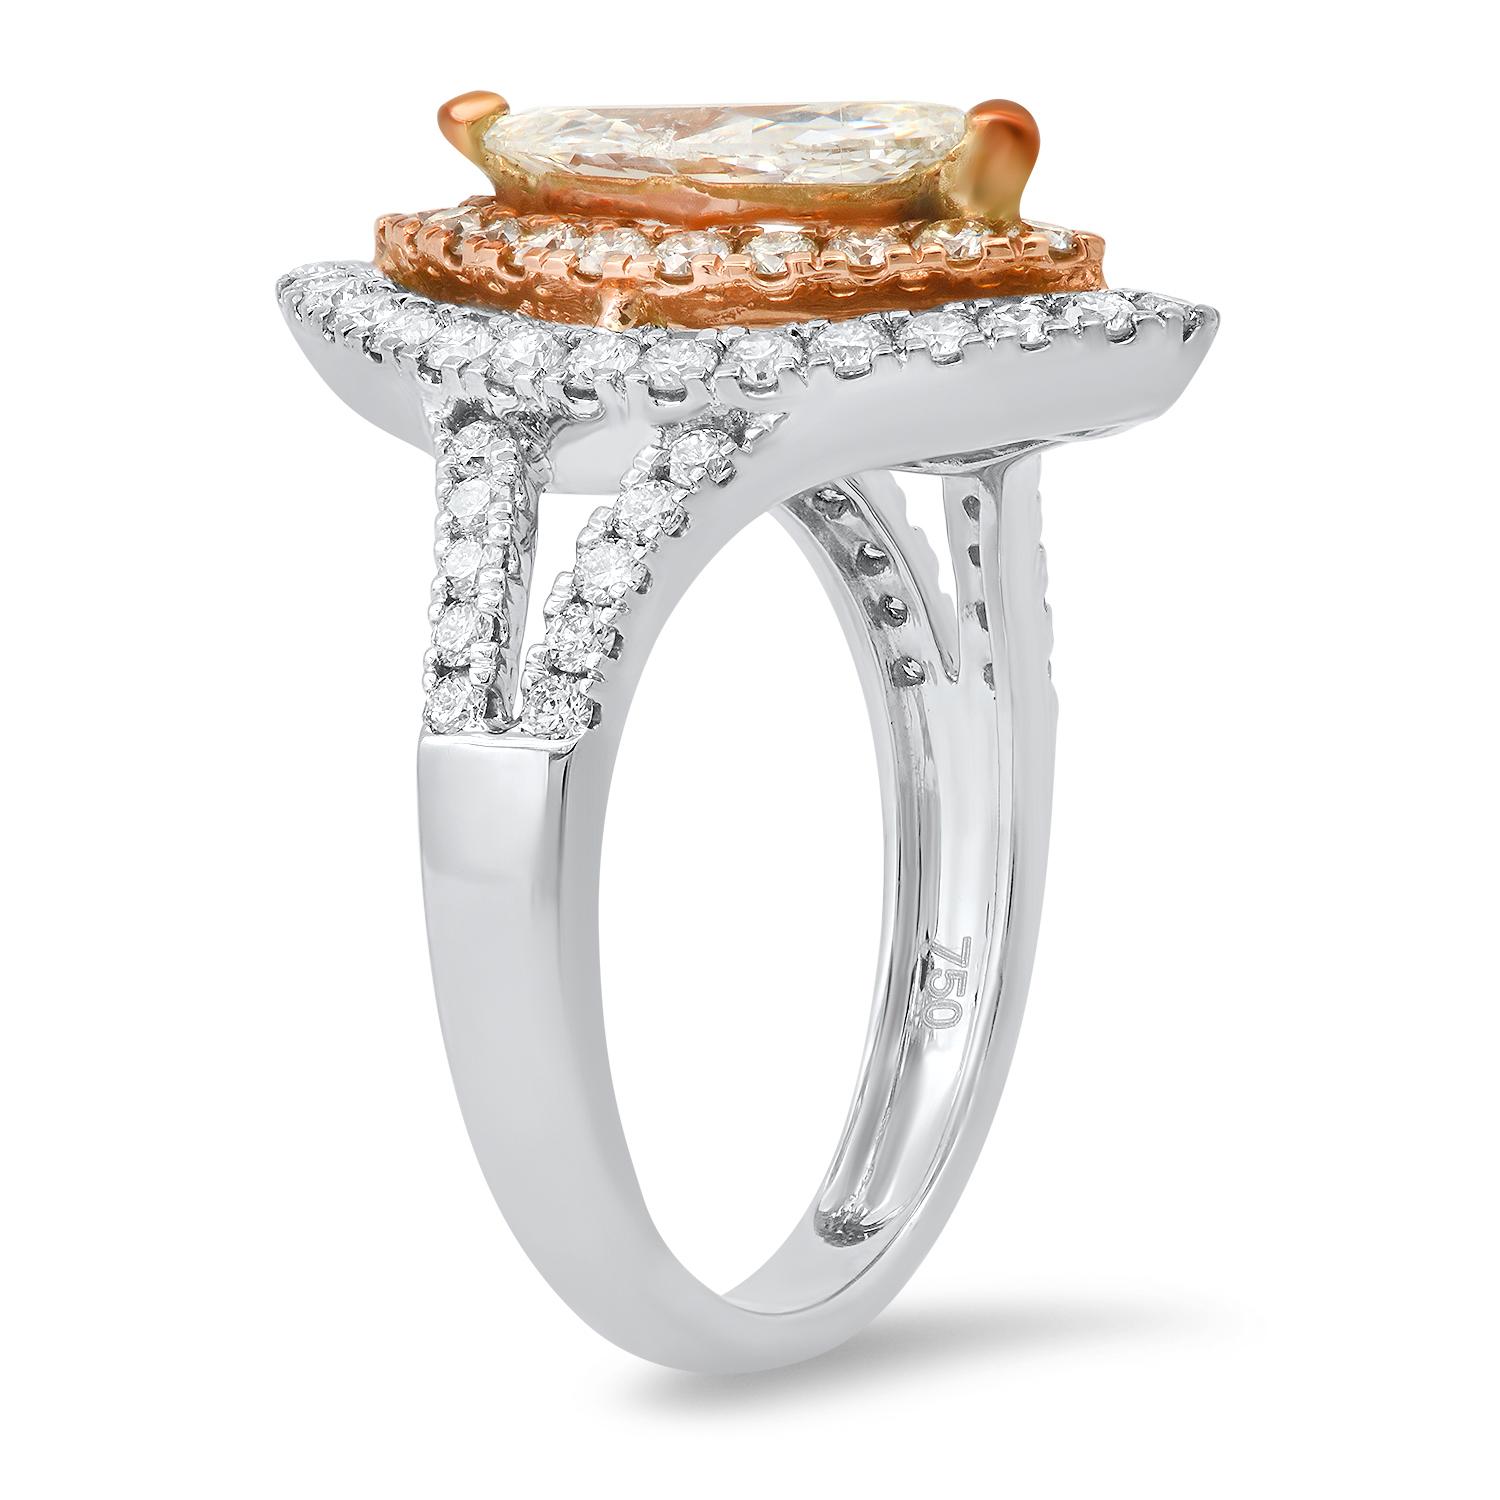 18K White and Rose Gold Setting with 0.90ct Center Diamond and 1.90tcw Diamond Ring